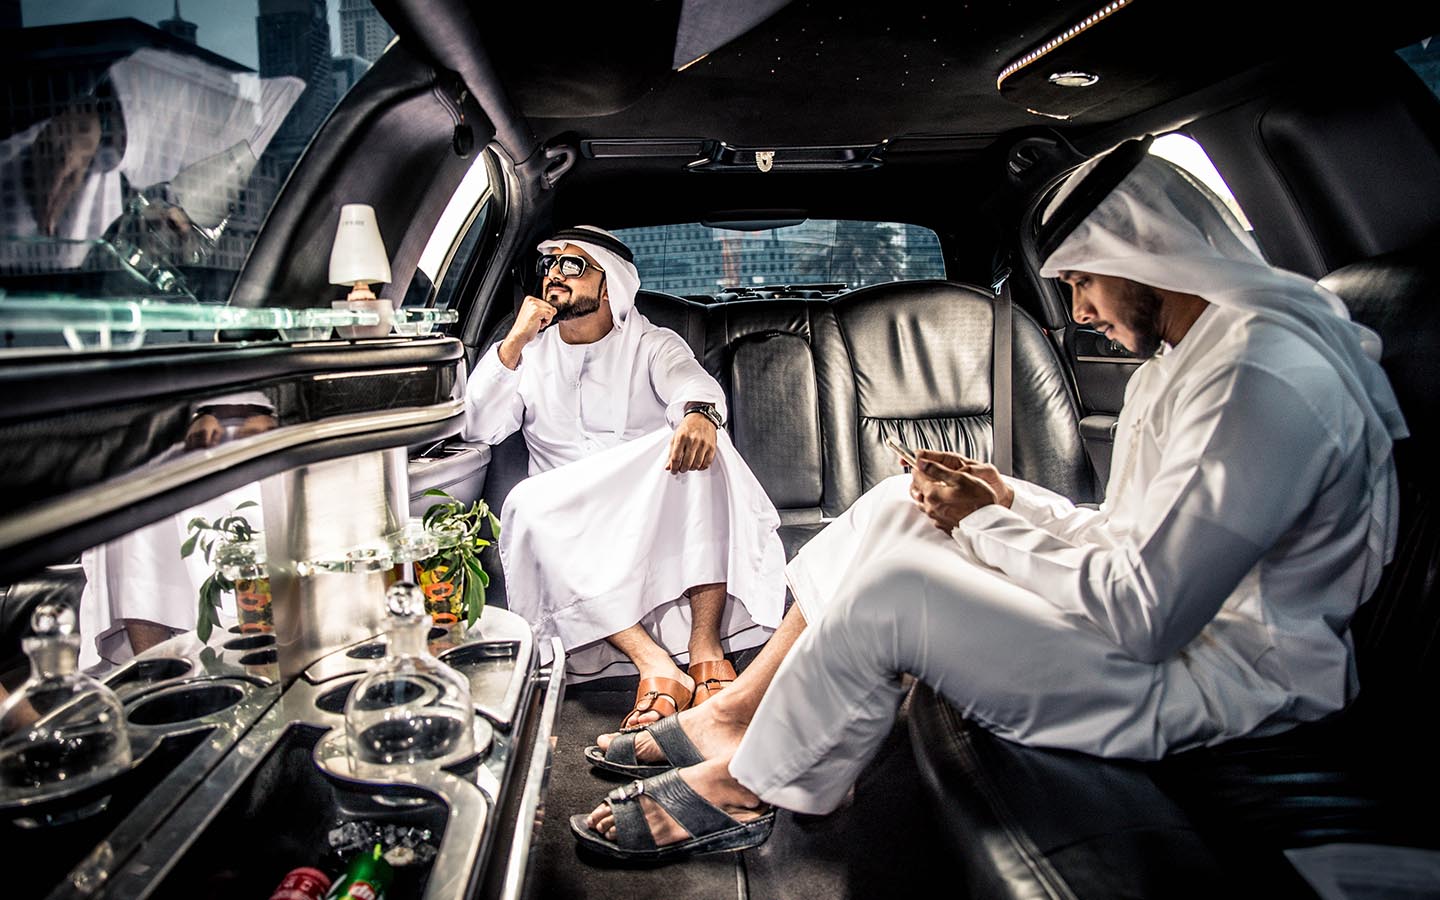 learn how to start limousine business in dubai and avail the many benefits that follow